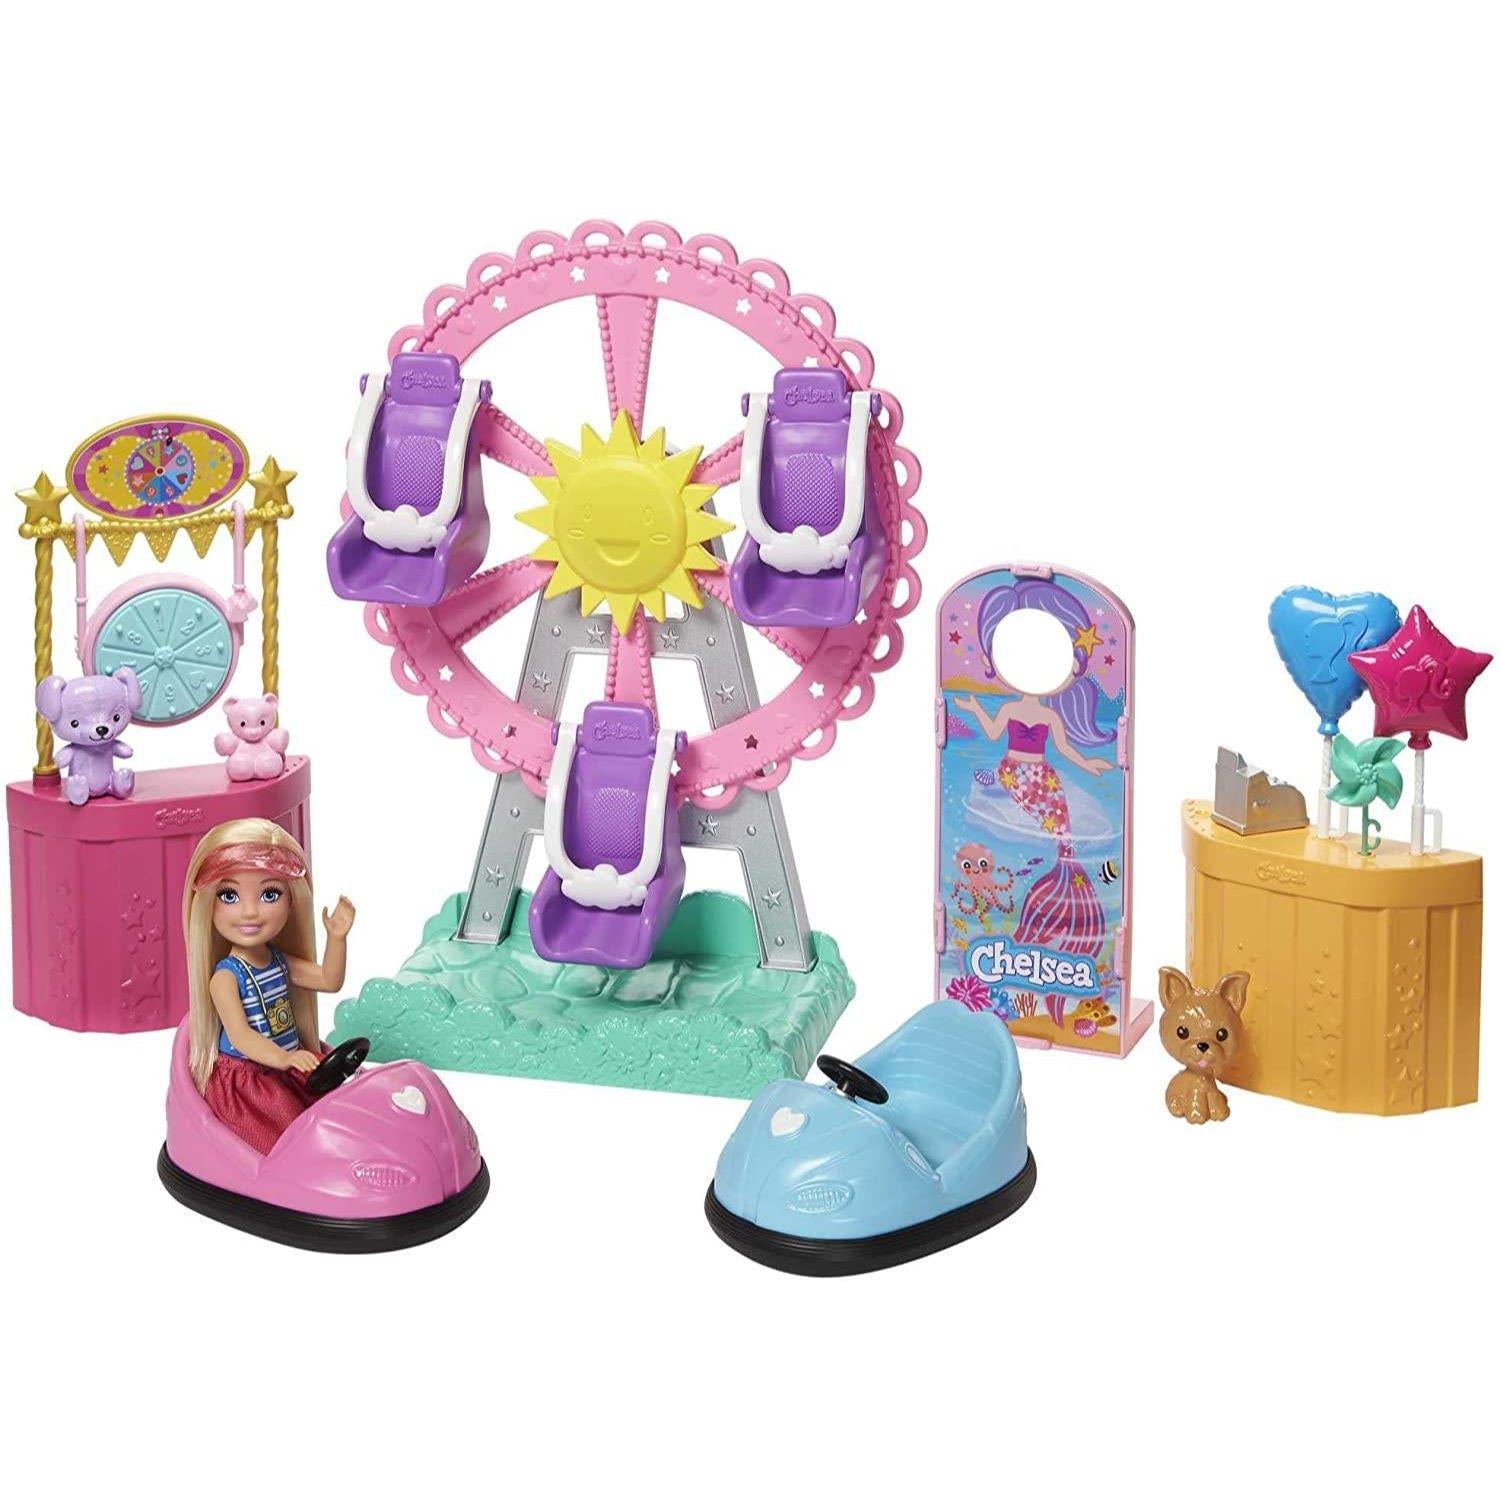 Barbie Barbie Club Chelsea Doll and Carnival Playset with 6-Inch Fashion Doll